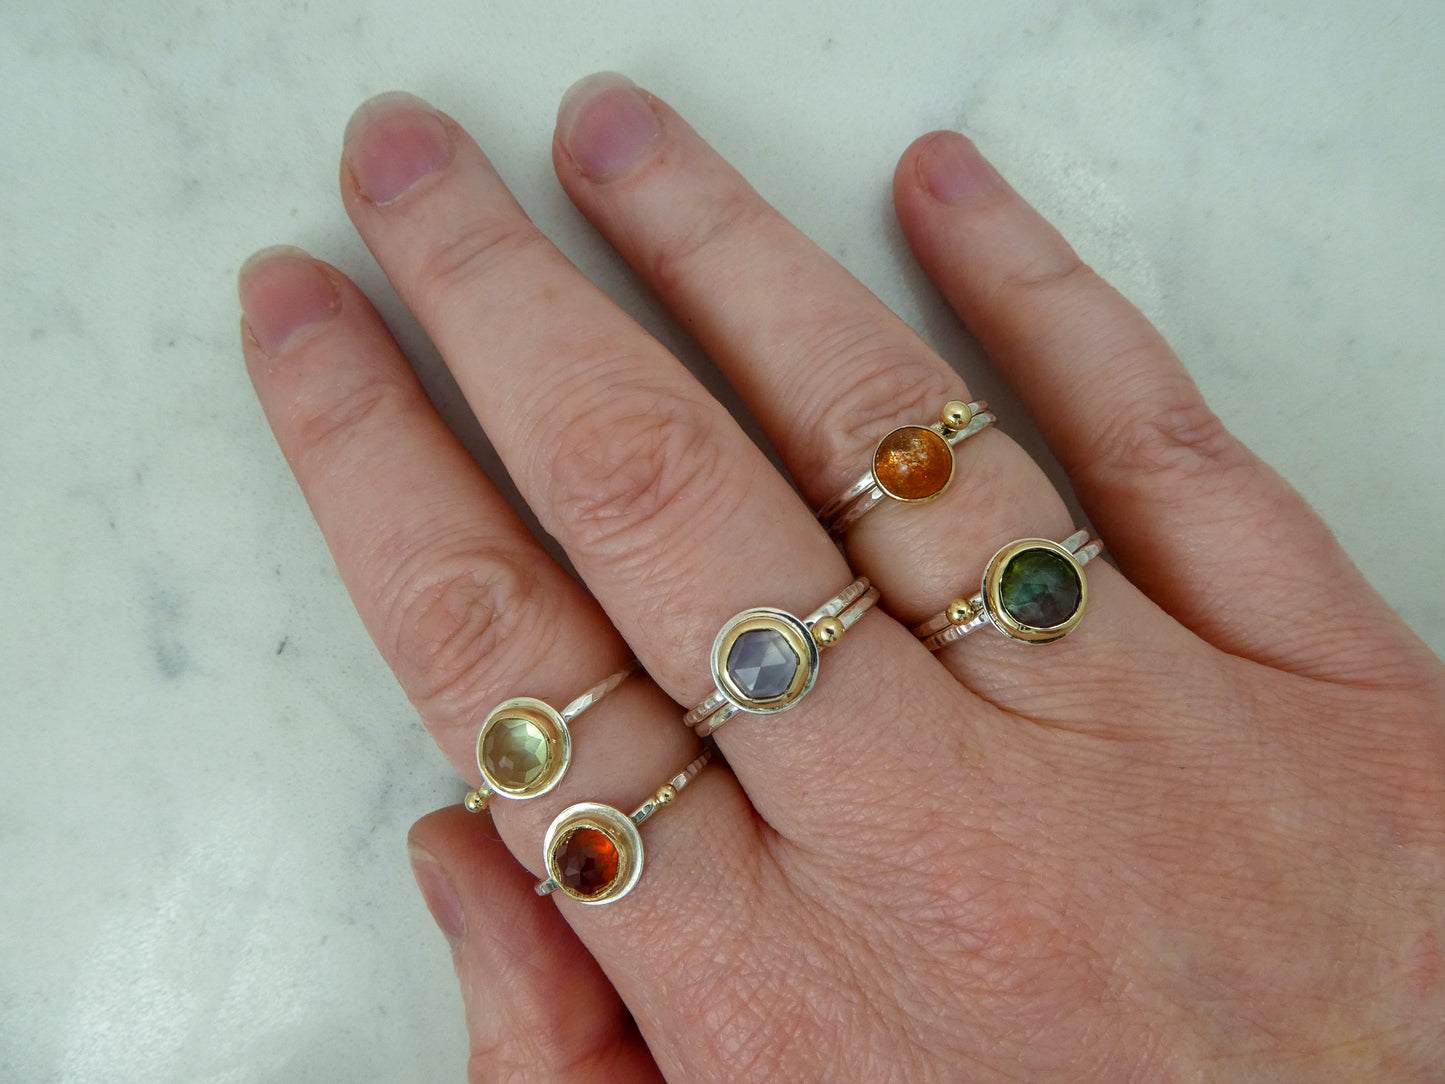 Golden Sunstone Gemstone in a 14k Yellow Gold Bezel on a Slim Silver Stacking Ring Set of 2, Size 5.5